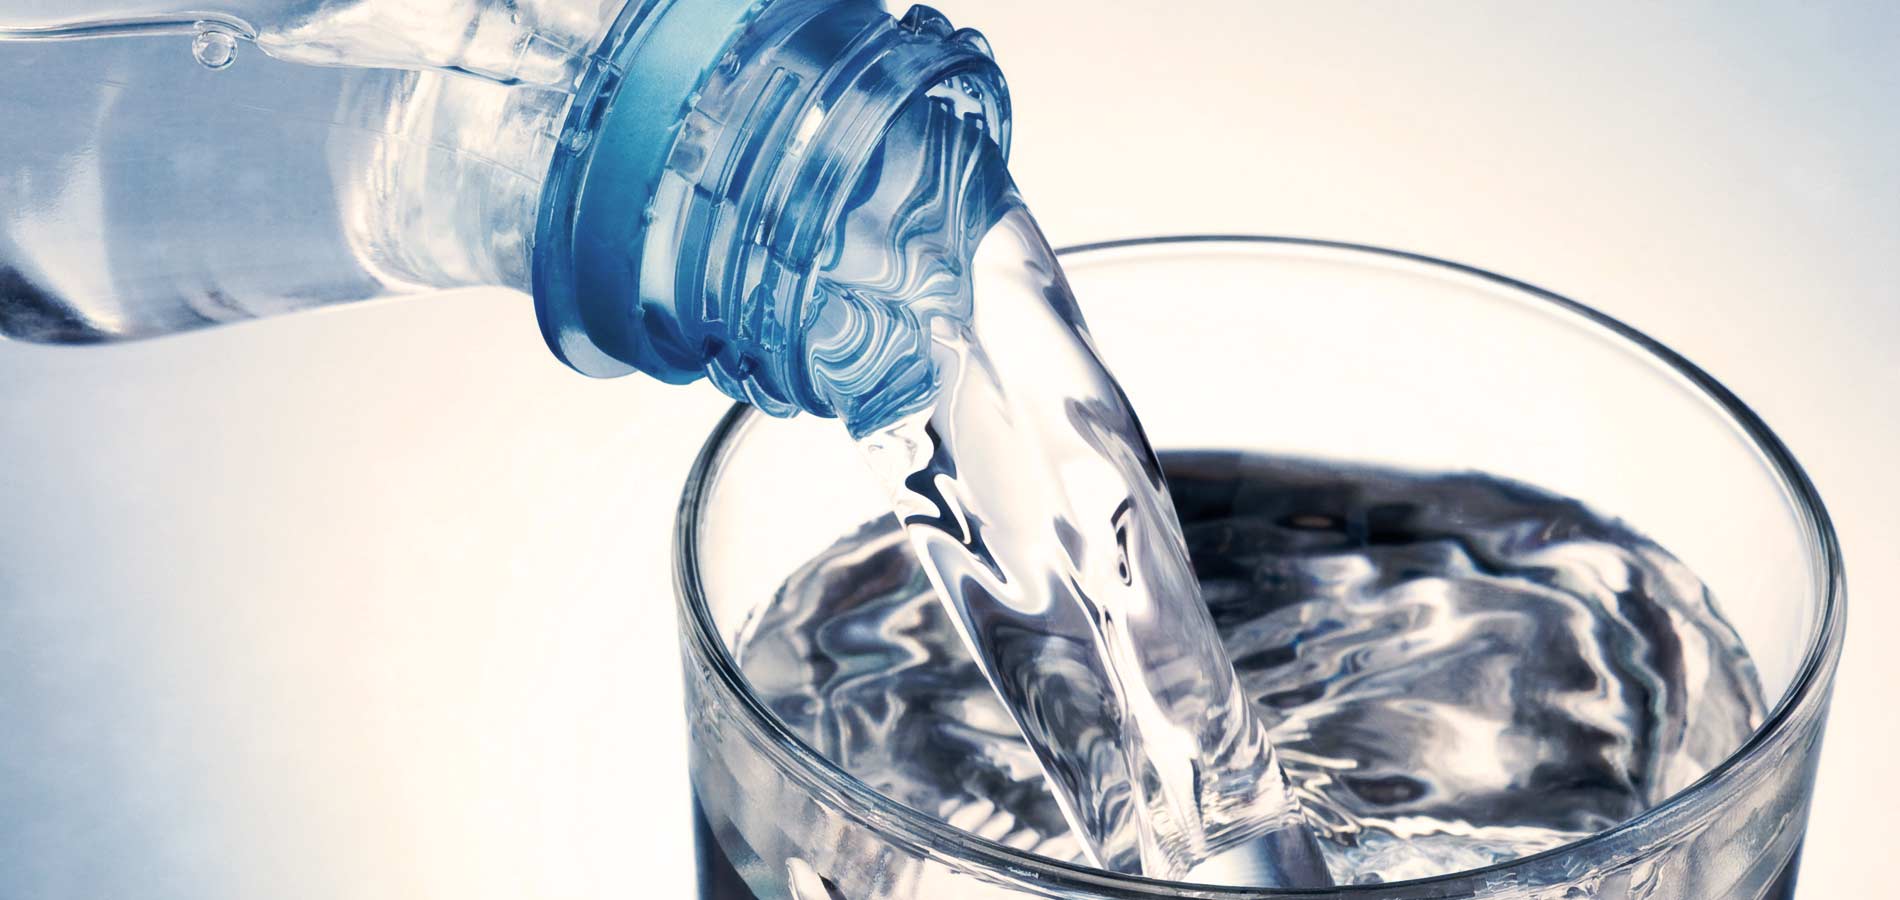 Fluoride & Bottled Water | Your Dentists in Dedham MA
